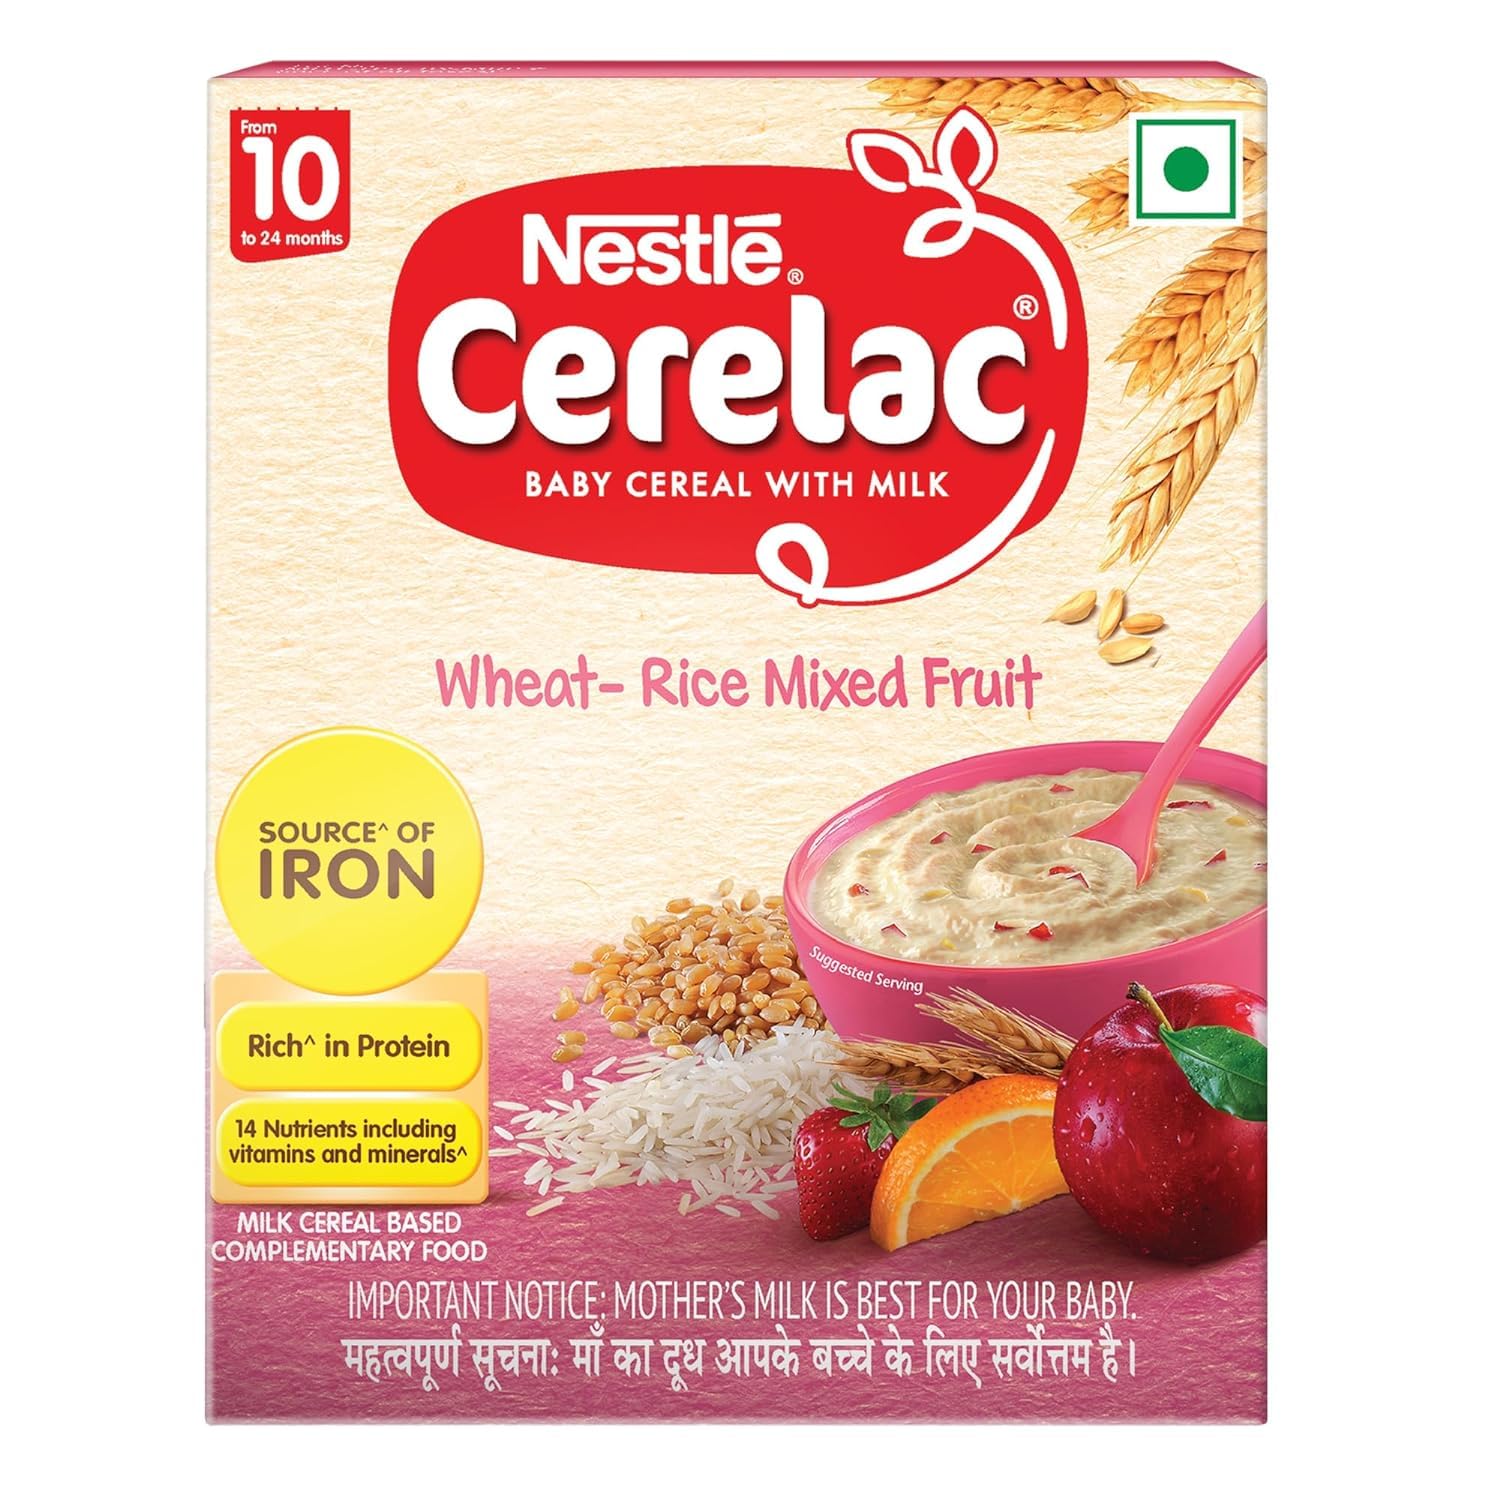 Nestle Cerelac Baby (10 months+) Cereal with Milk, Iron, Vitamins & Minerals | Wheat Rice Mix Fruit